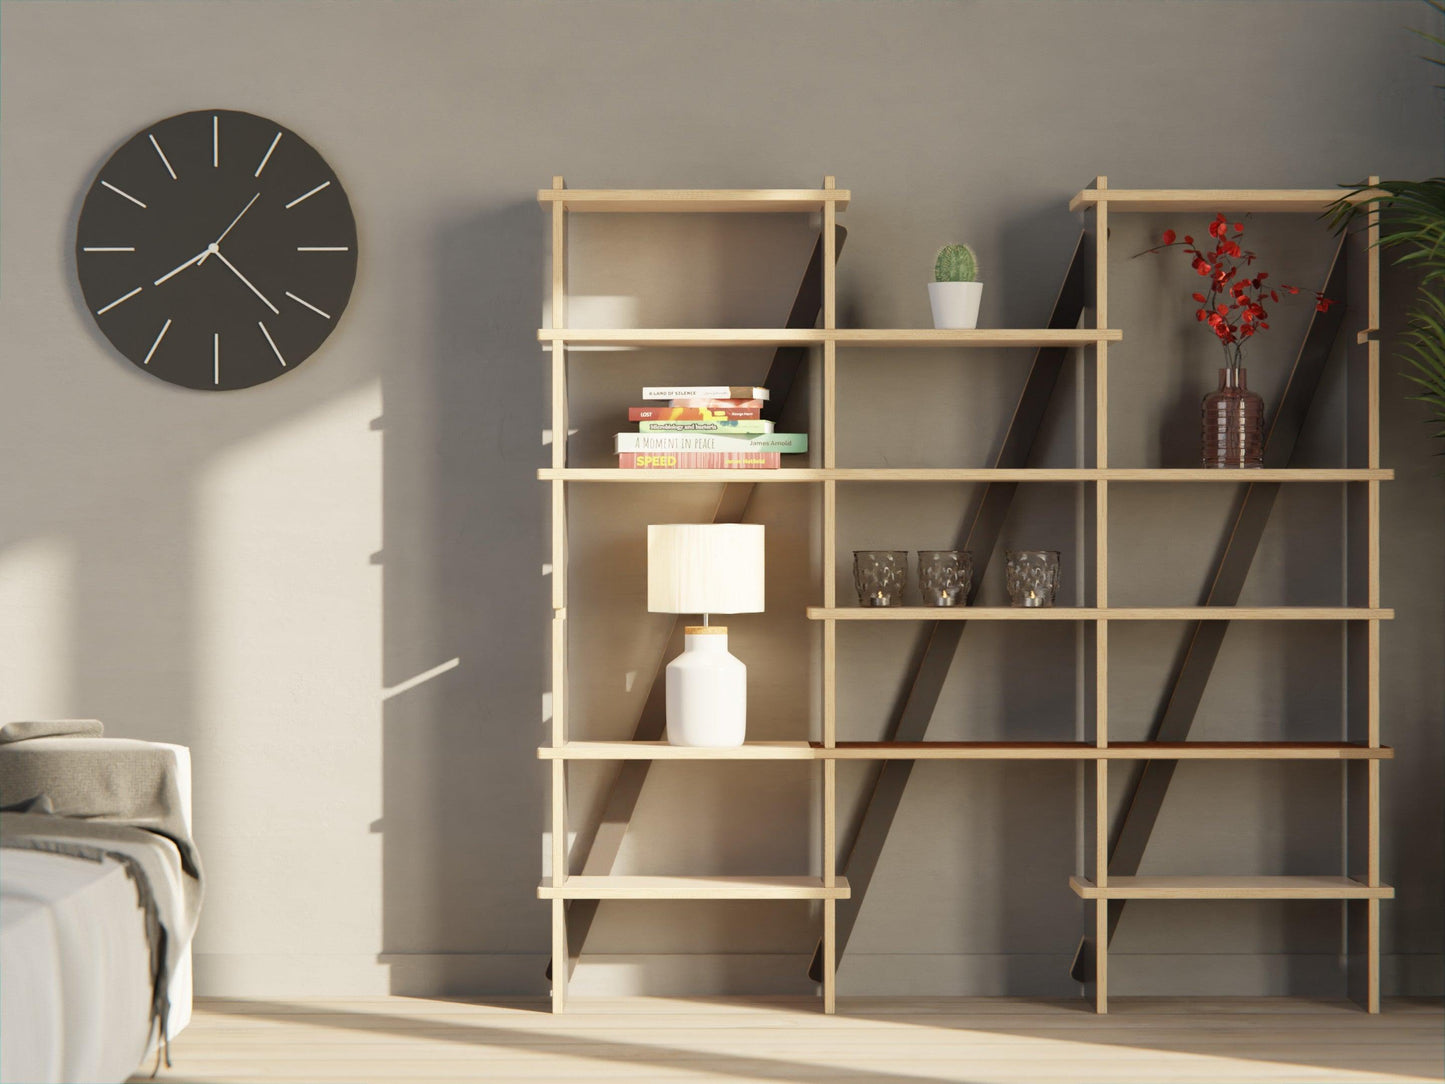 Upgrade your space with our wooden bookshelf. Modular Shelf Storage System designed for style and convenience.